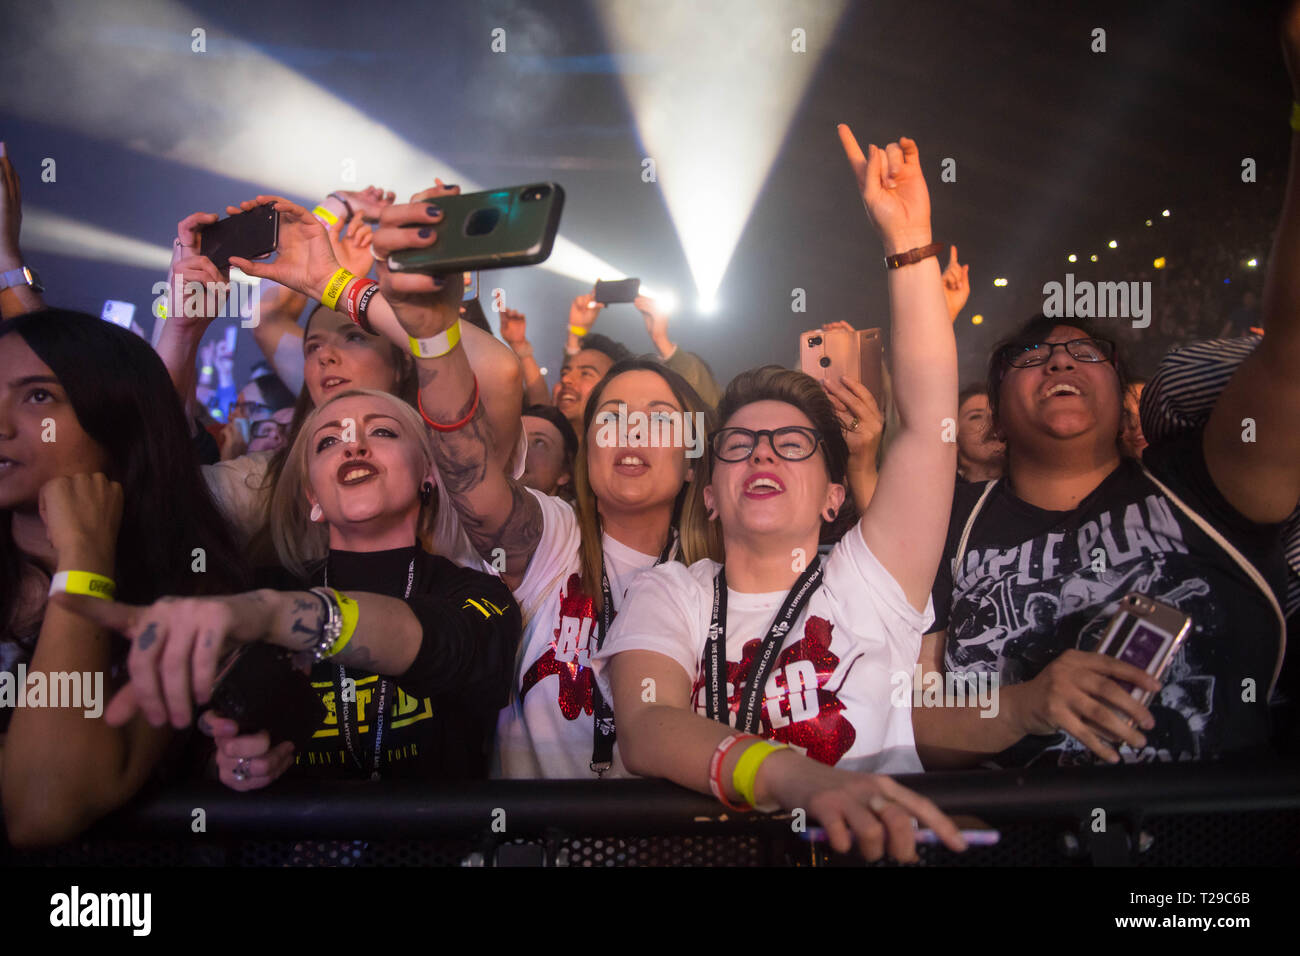 United Kingdom, Wembley Arena, 30th March 2018.  Busted fans to see their band perform live on stage during their 'Half Way There' tour at Wembley Arena.  Michael Tubi / Alamy Live News Stock Photo